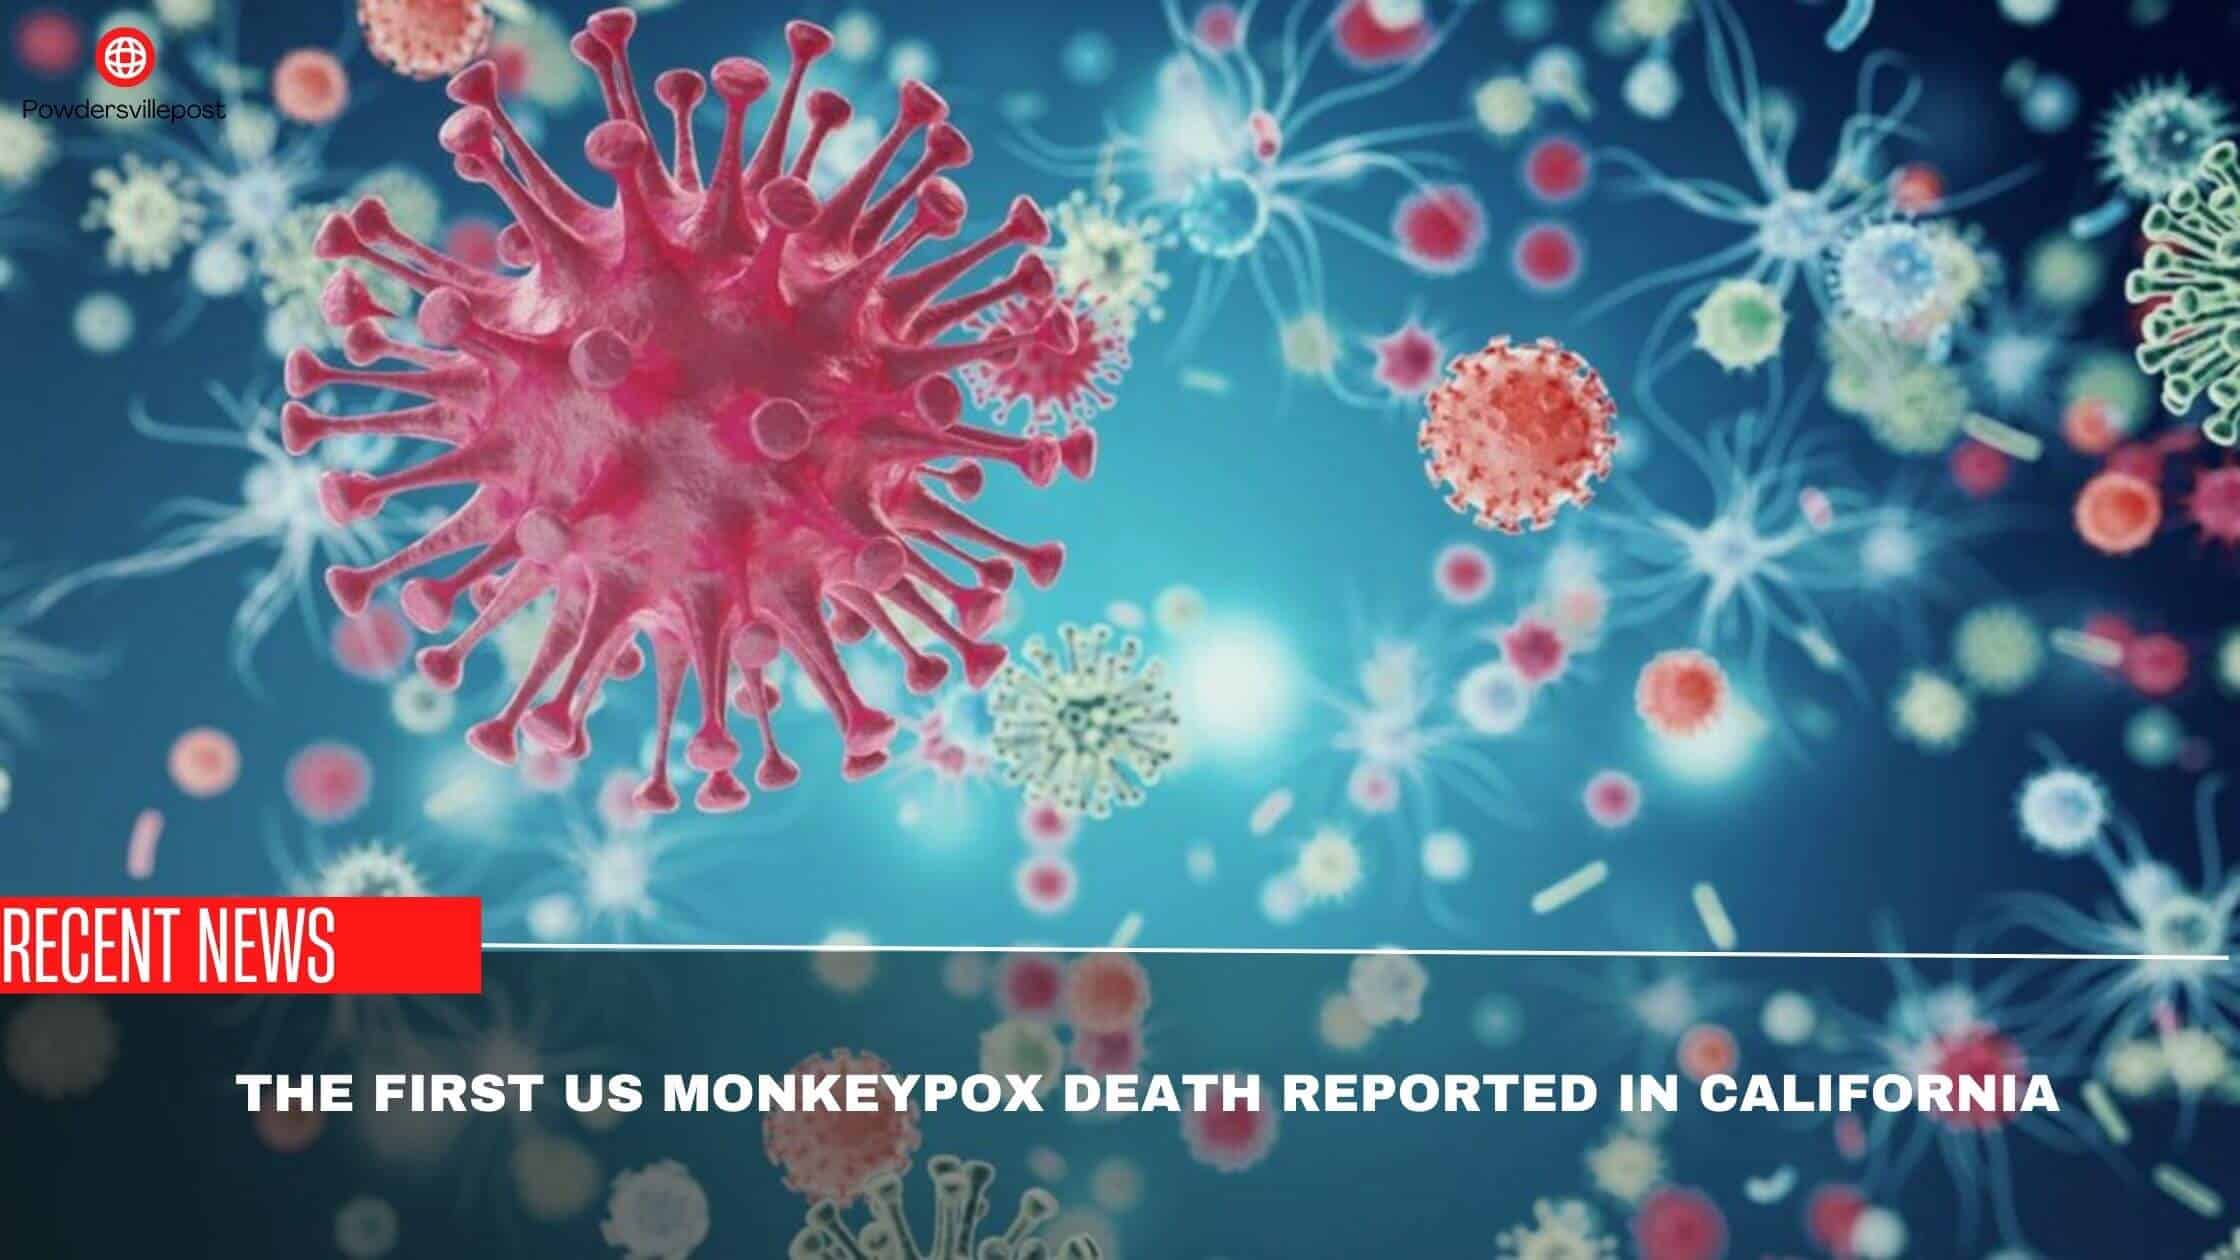 The First US Monkeypox Death Reported In California